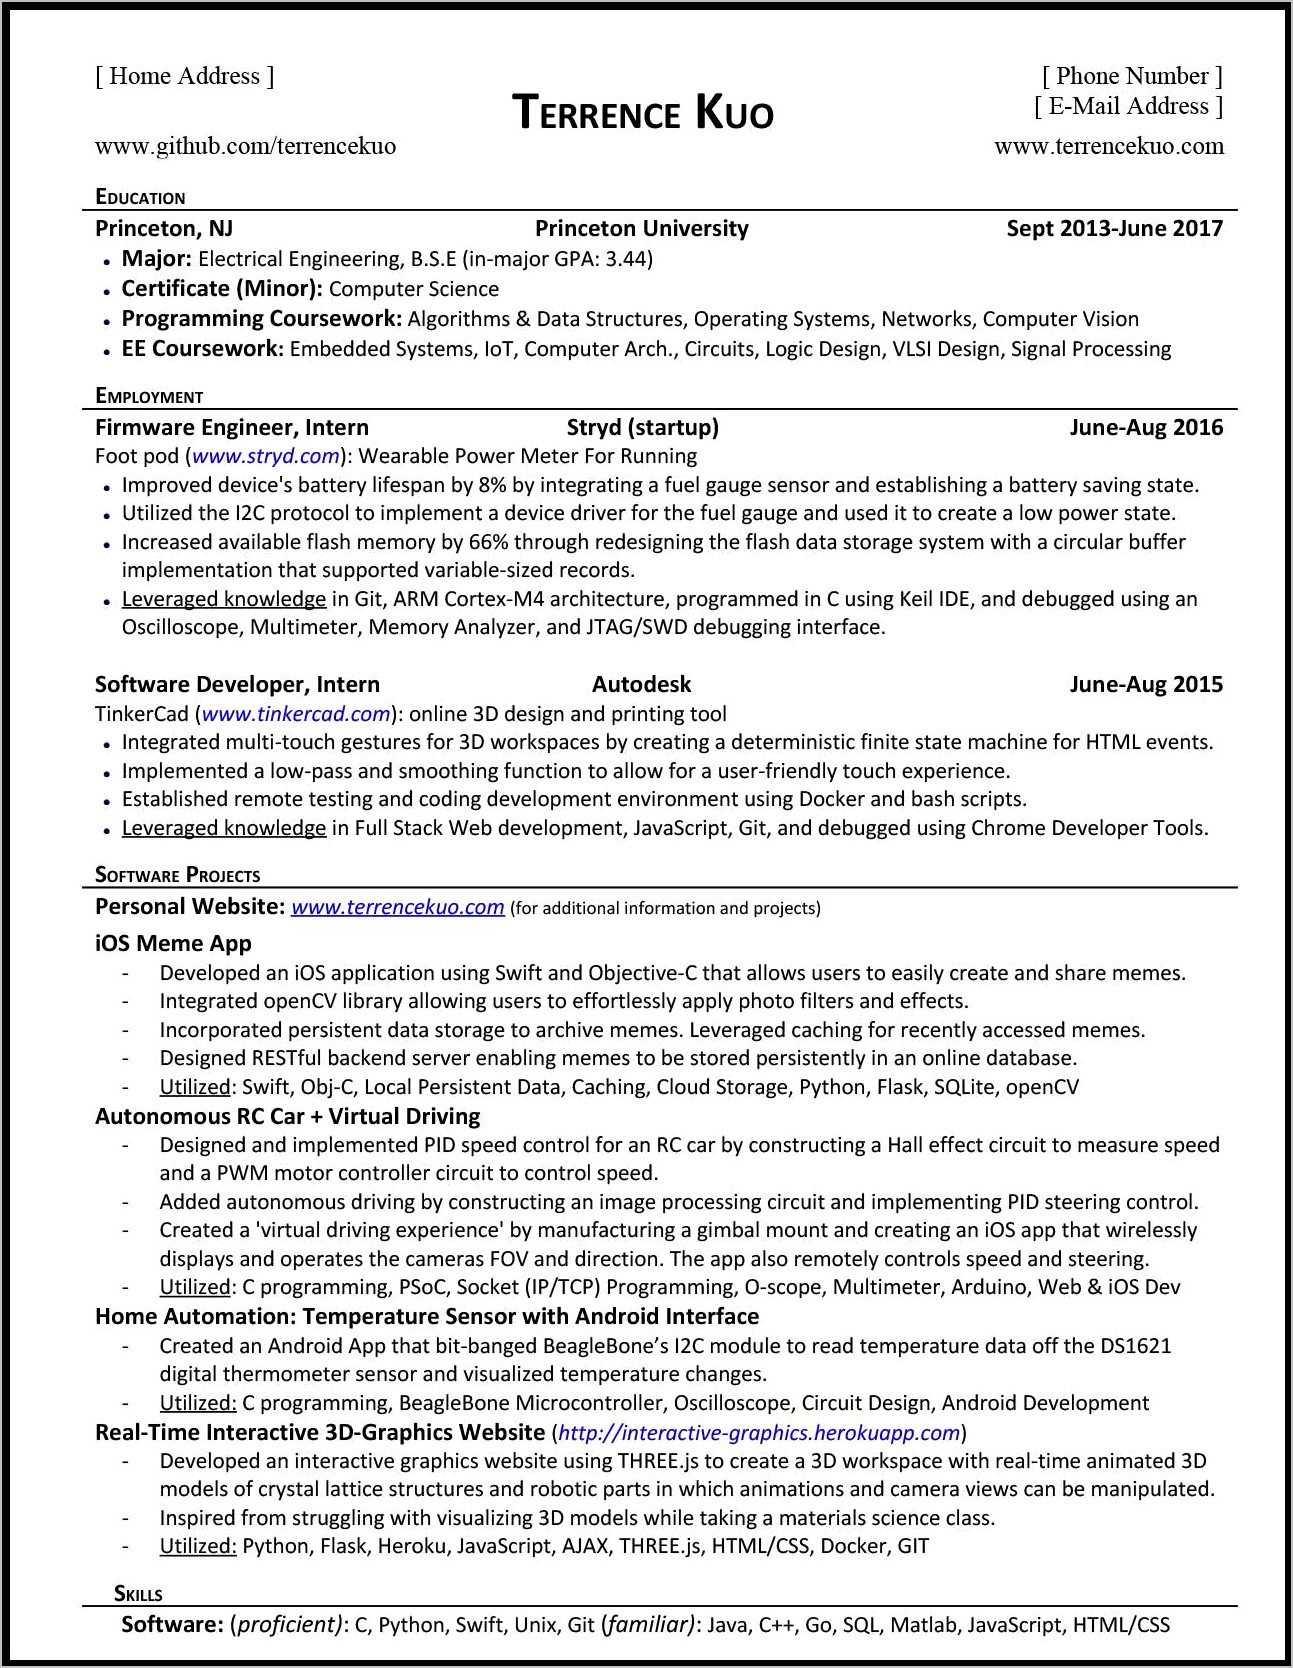 Resume Bullet Point Examples Entry Level